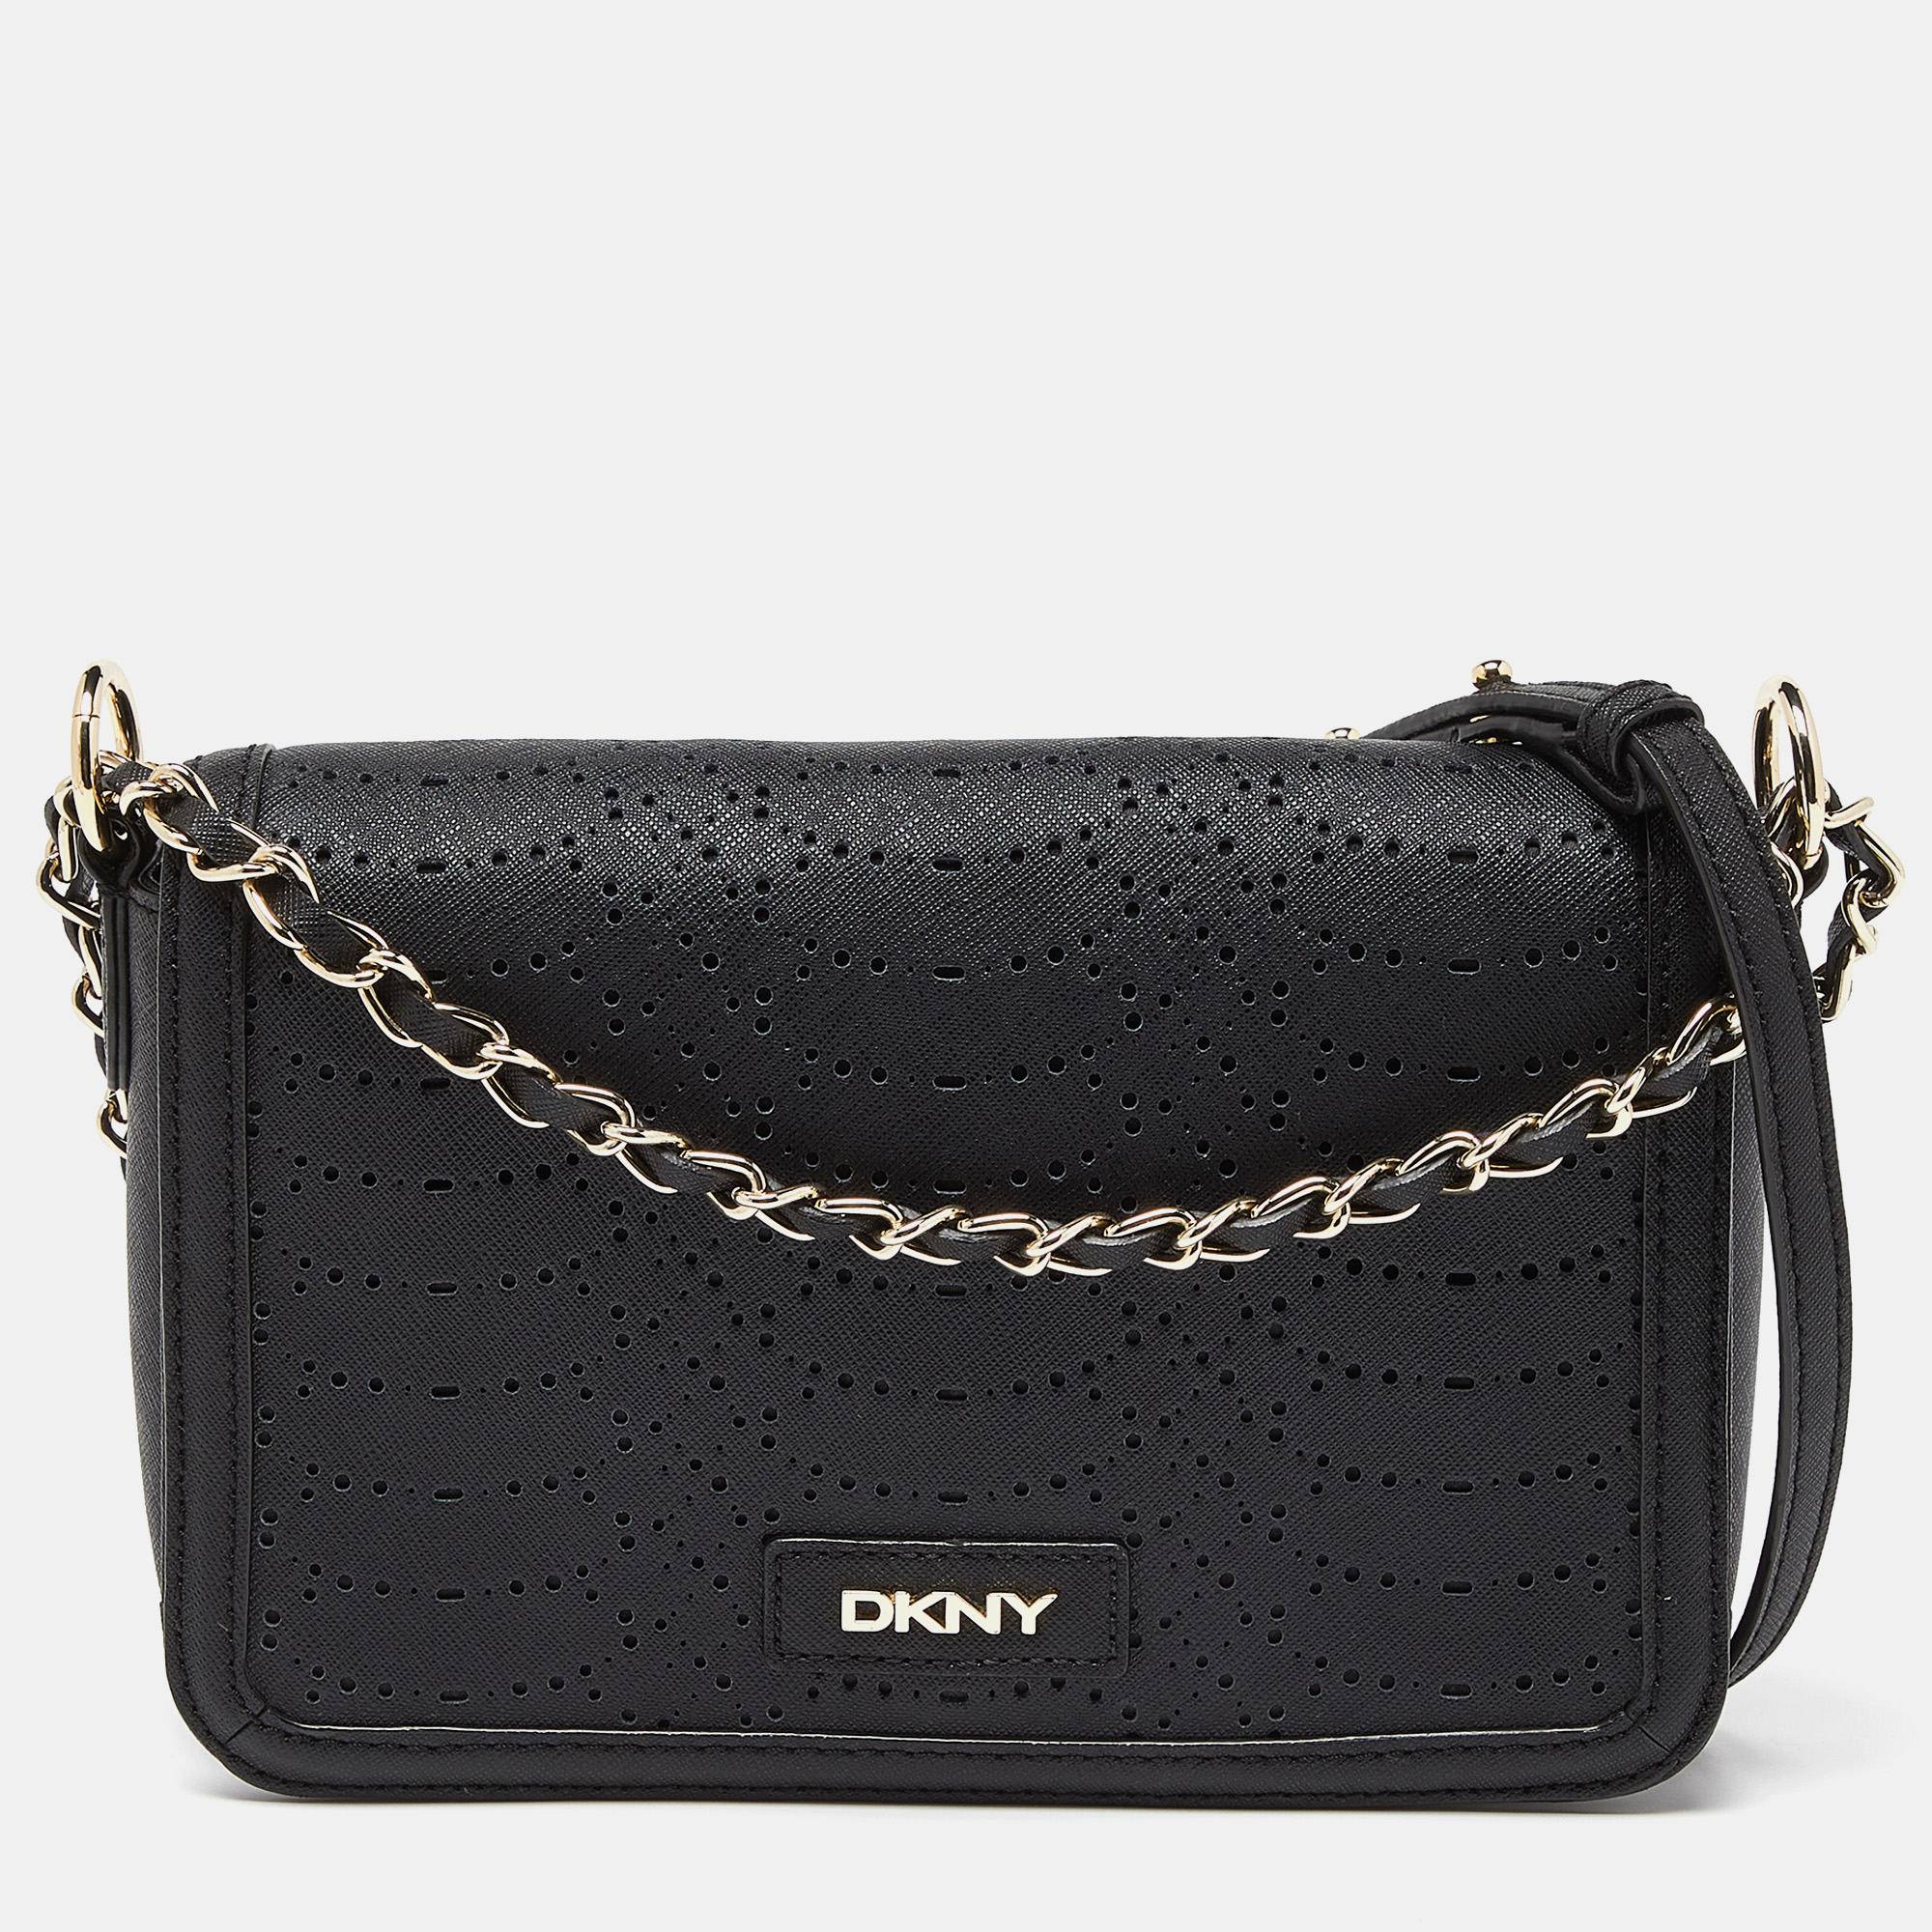 Pre-owned Dkny Black Leather Flap Chain Shoulder Bag